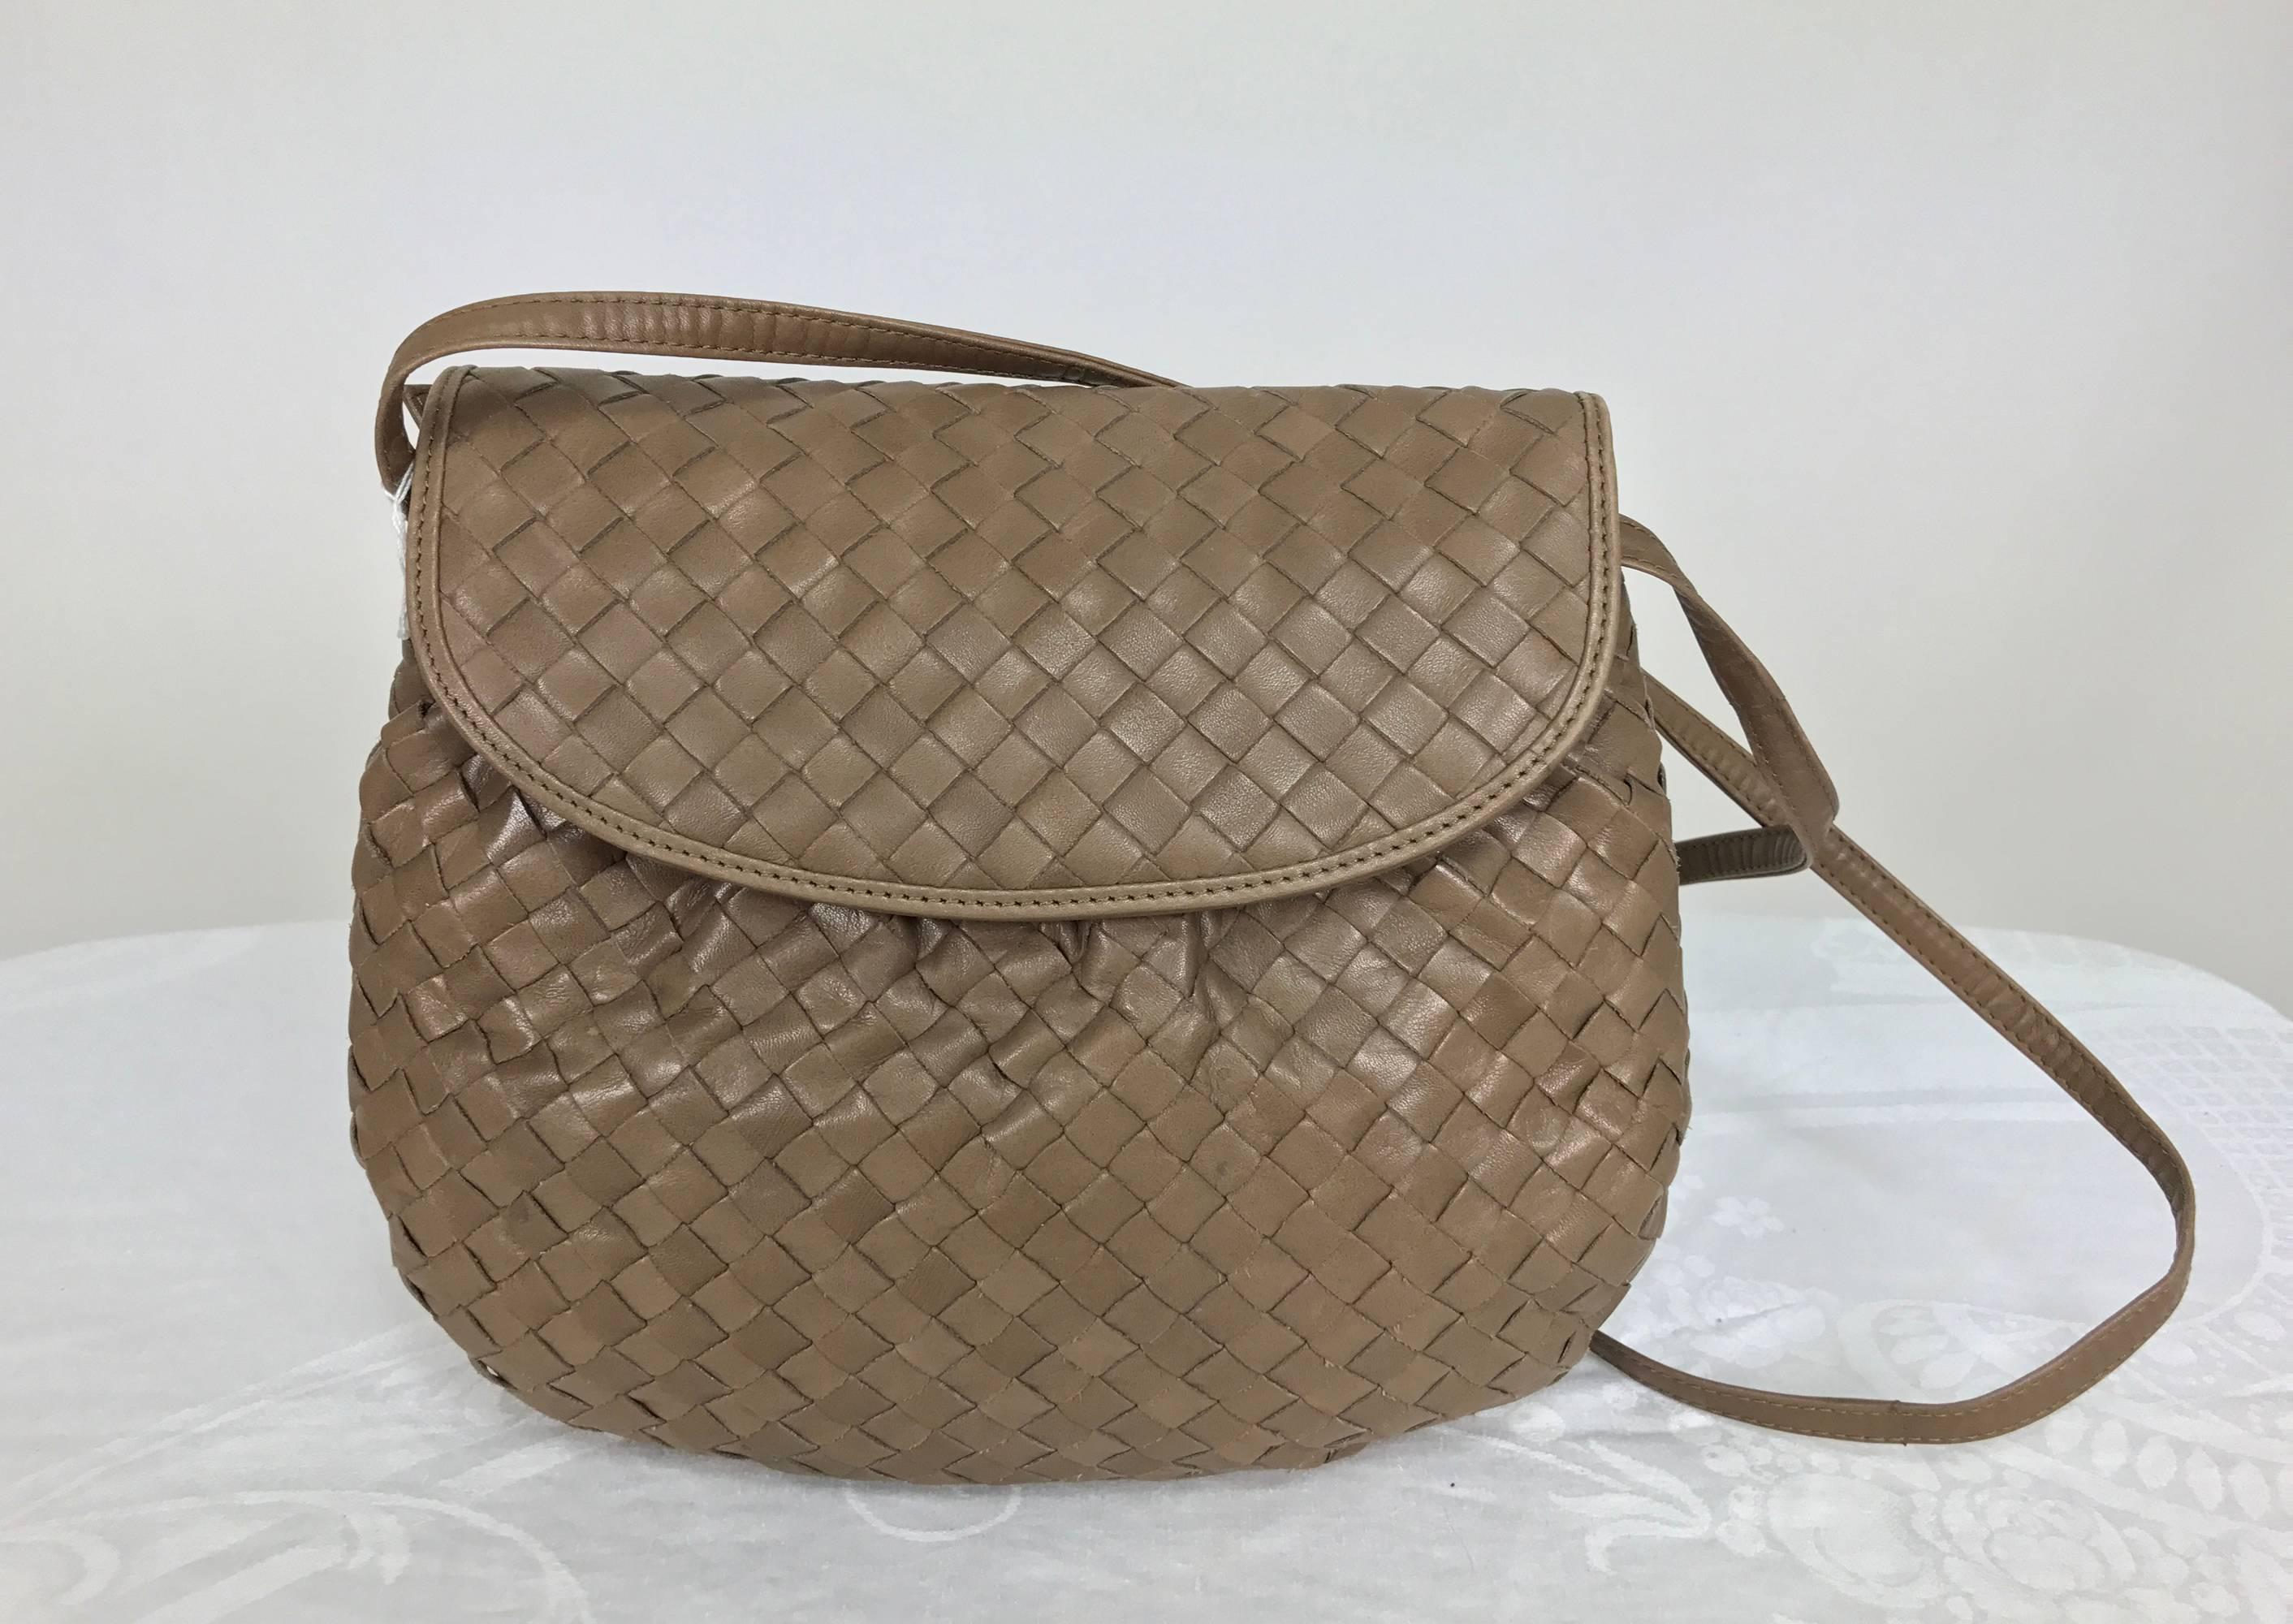 Bottega Veneta Intrecciato cocoa leather shoulder, clutch, handbag 1980s new with the original tags...Great size...Flap front bag is buttery soft...Gathered at each side for extra space inside...The shoulder strap can be removed or lengthened a bit